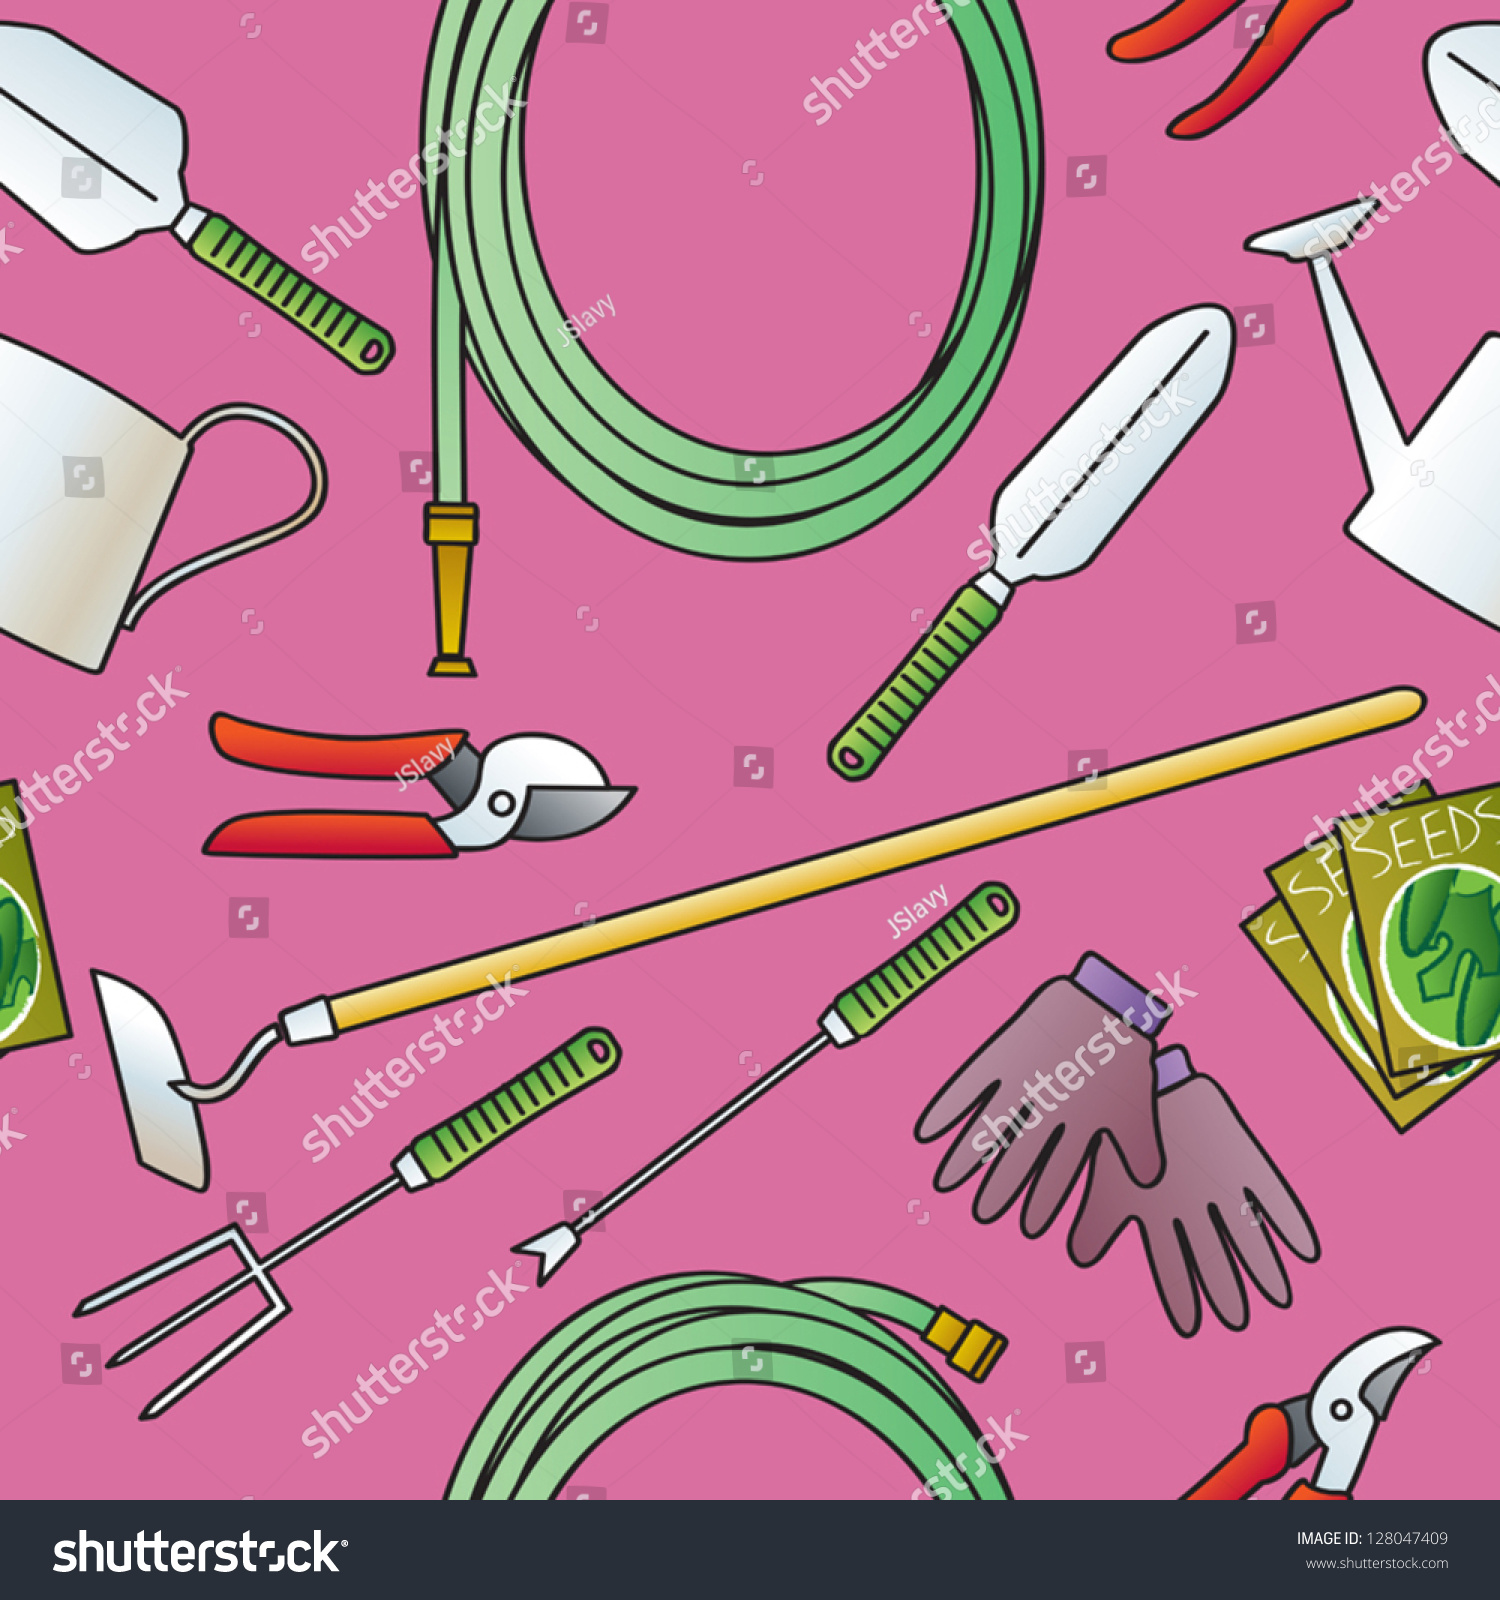 A seamless pattern of common garden tools. #128047409